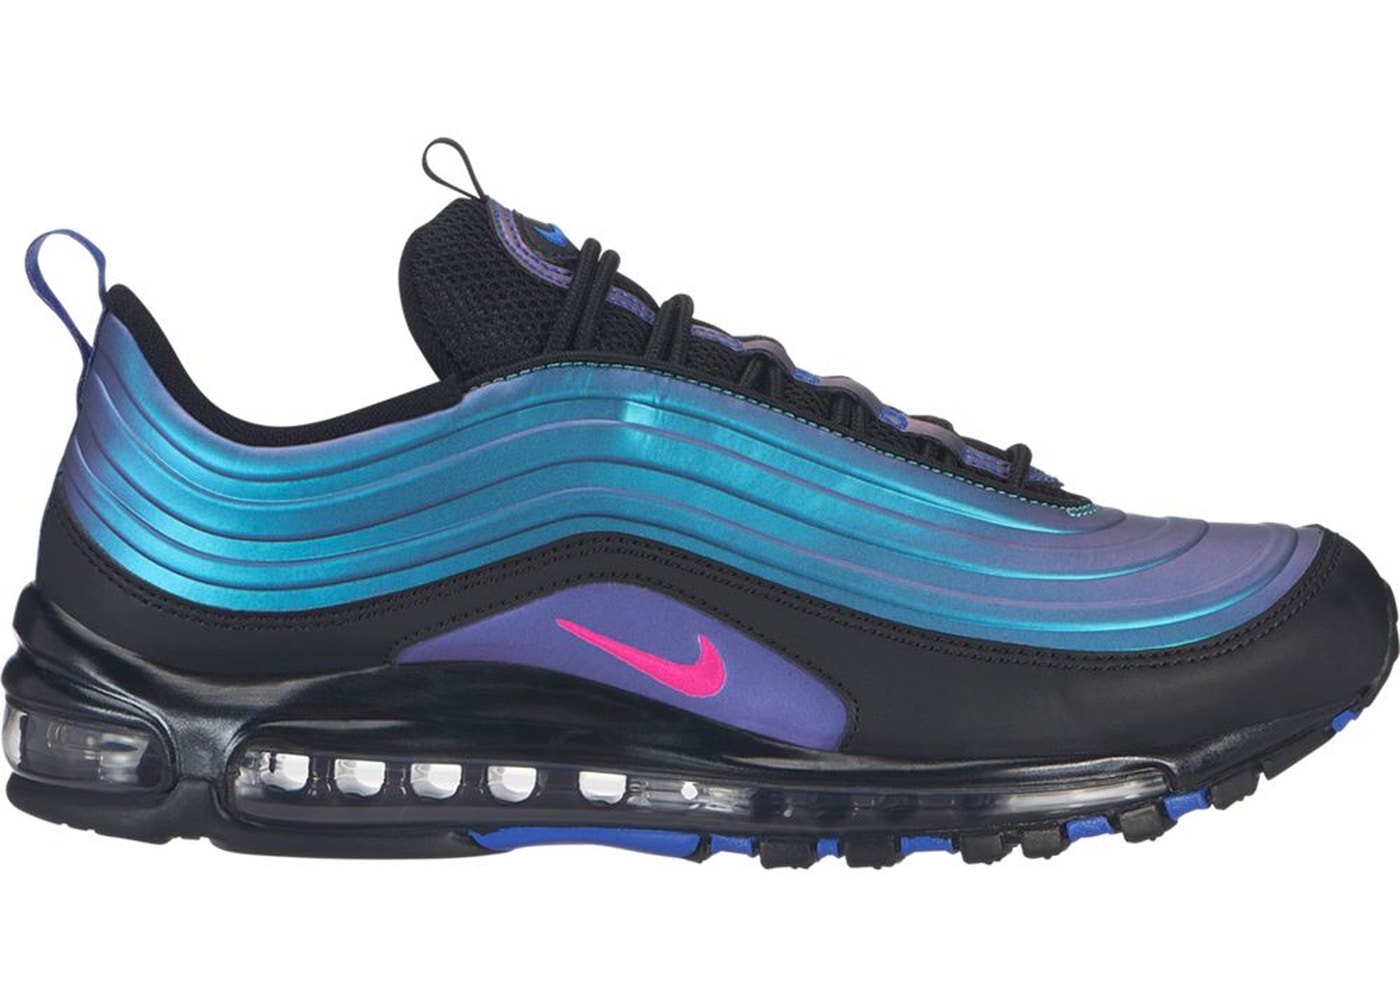 Now Nike Air Max 97 "Throwback Future" — Sneaker Shouts